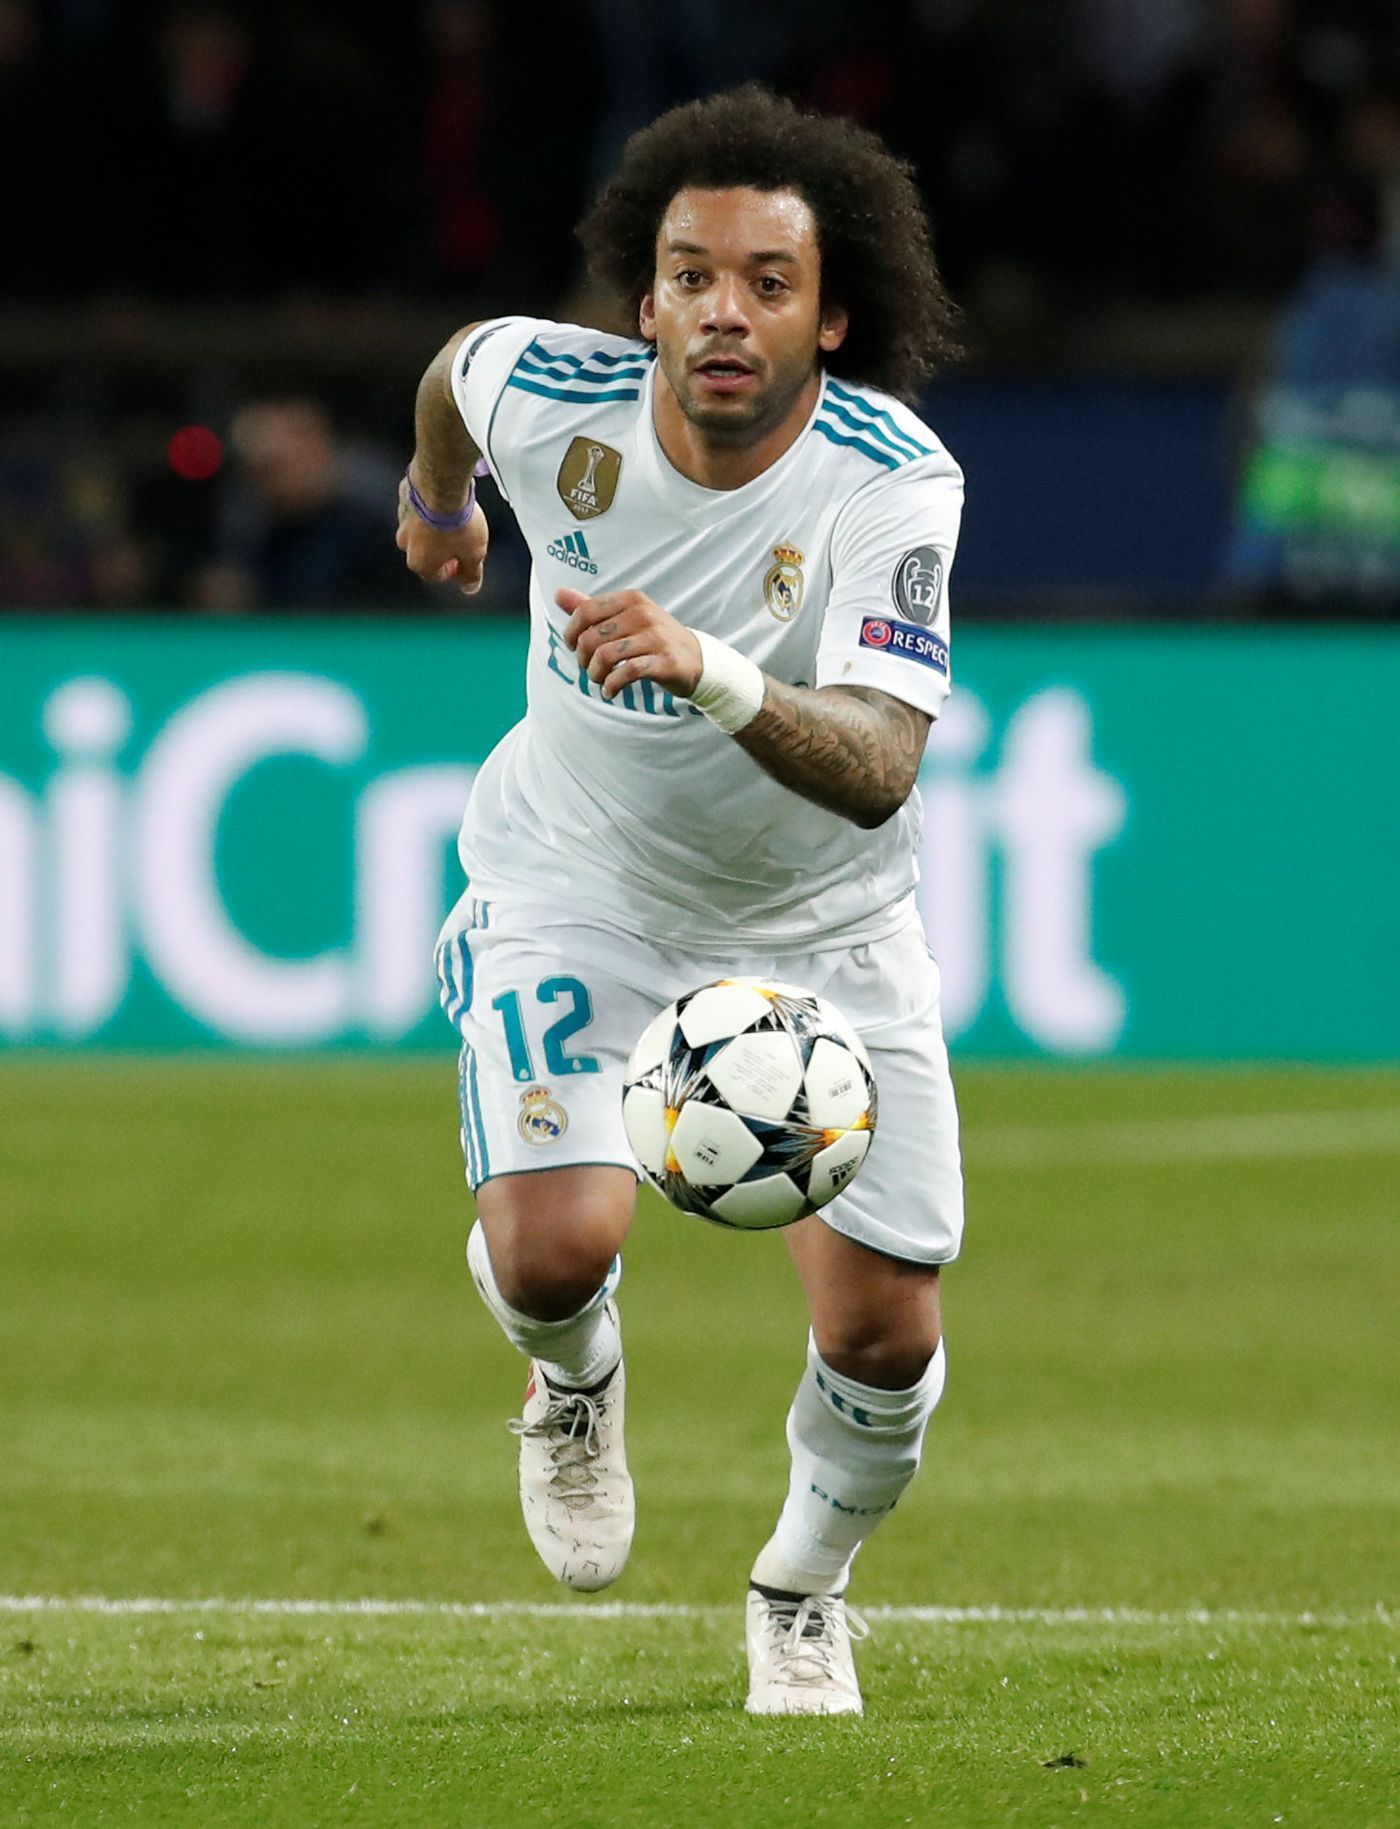 LM, PSG-Real: Marcelo